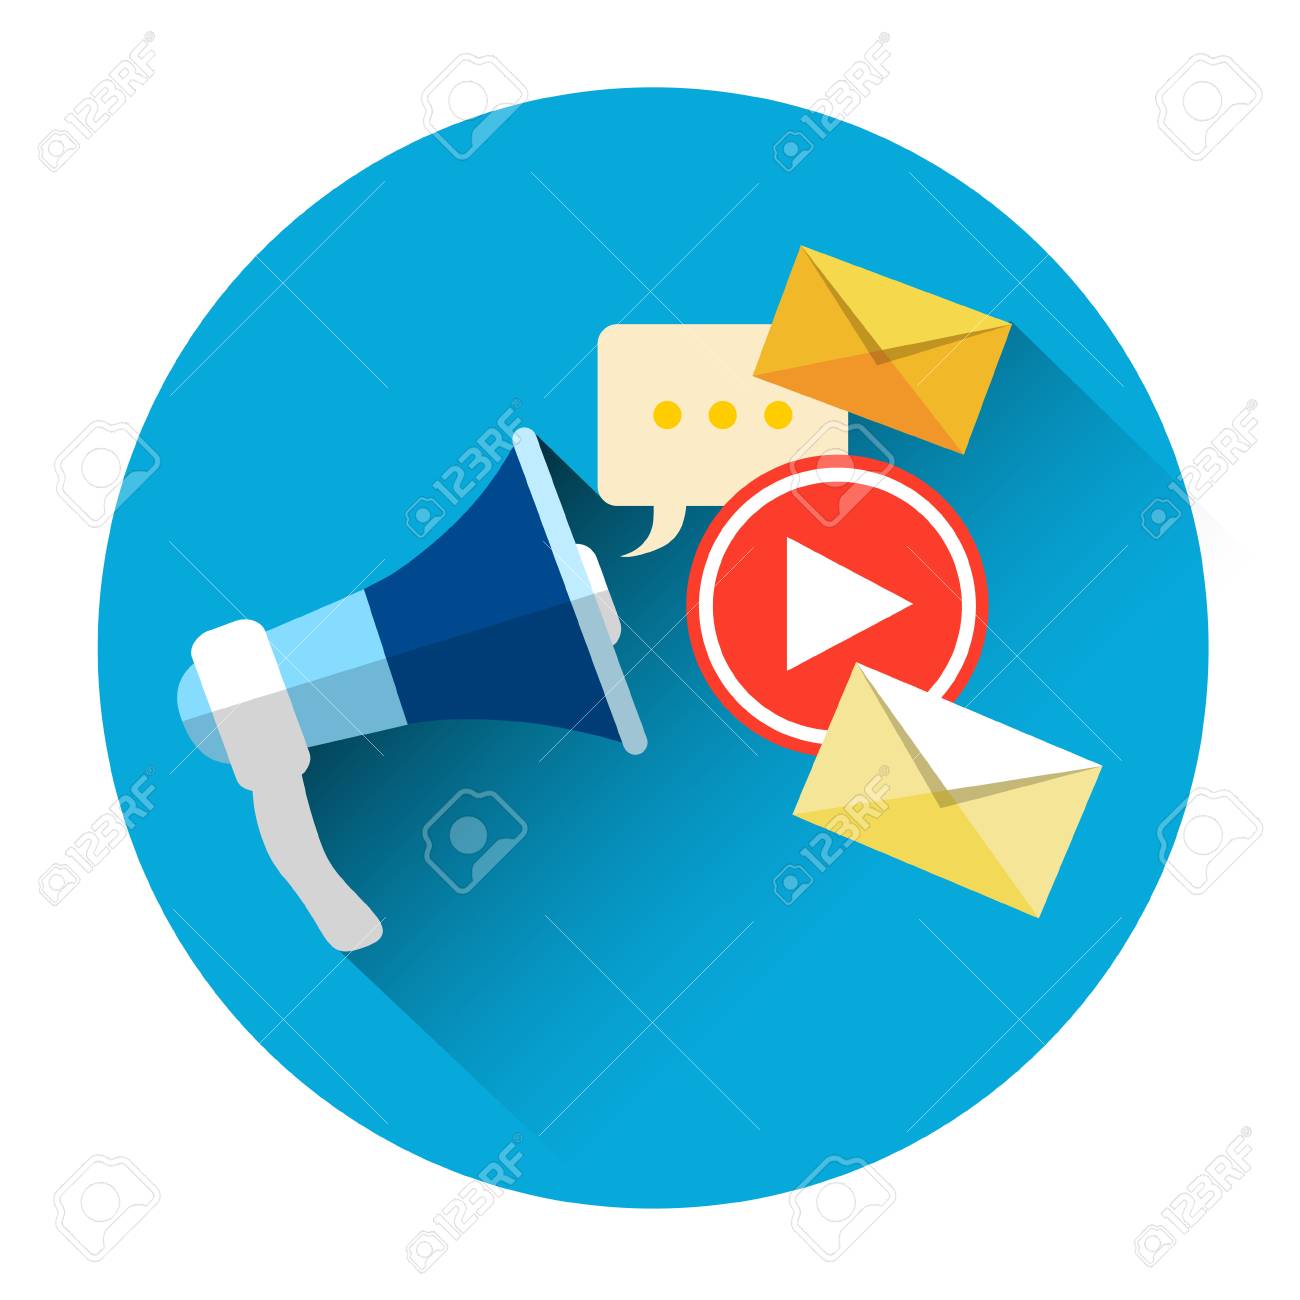 Read more about the article Email Marketing Icon | Things About Email Marketing Icon You May Not Have Known<span class="rmp-archive-results-widget "><i class=" rmp-icon rmp-icon--ratings rmp-icon--star rmp-icon--full-highlight"></i><i class=" rmp-icon rmp-icon--ratings rmp-icon--star rmp-icon--full-highlight"></i><i class=" rmp-icon rmp-icon--ratings rmp-icon--star rmp-icon--full-highlight"></i><i class=" rmp-icon rmp-icon--ratings rmp-icon--star rmp-icon--full-highlight"></i><i class=" rmp-icon rmp-icon--ratings rmp-icon--star rmp-icon--full-highlight"></i> <span>5 (143)</span></span>